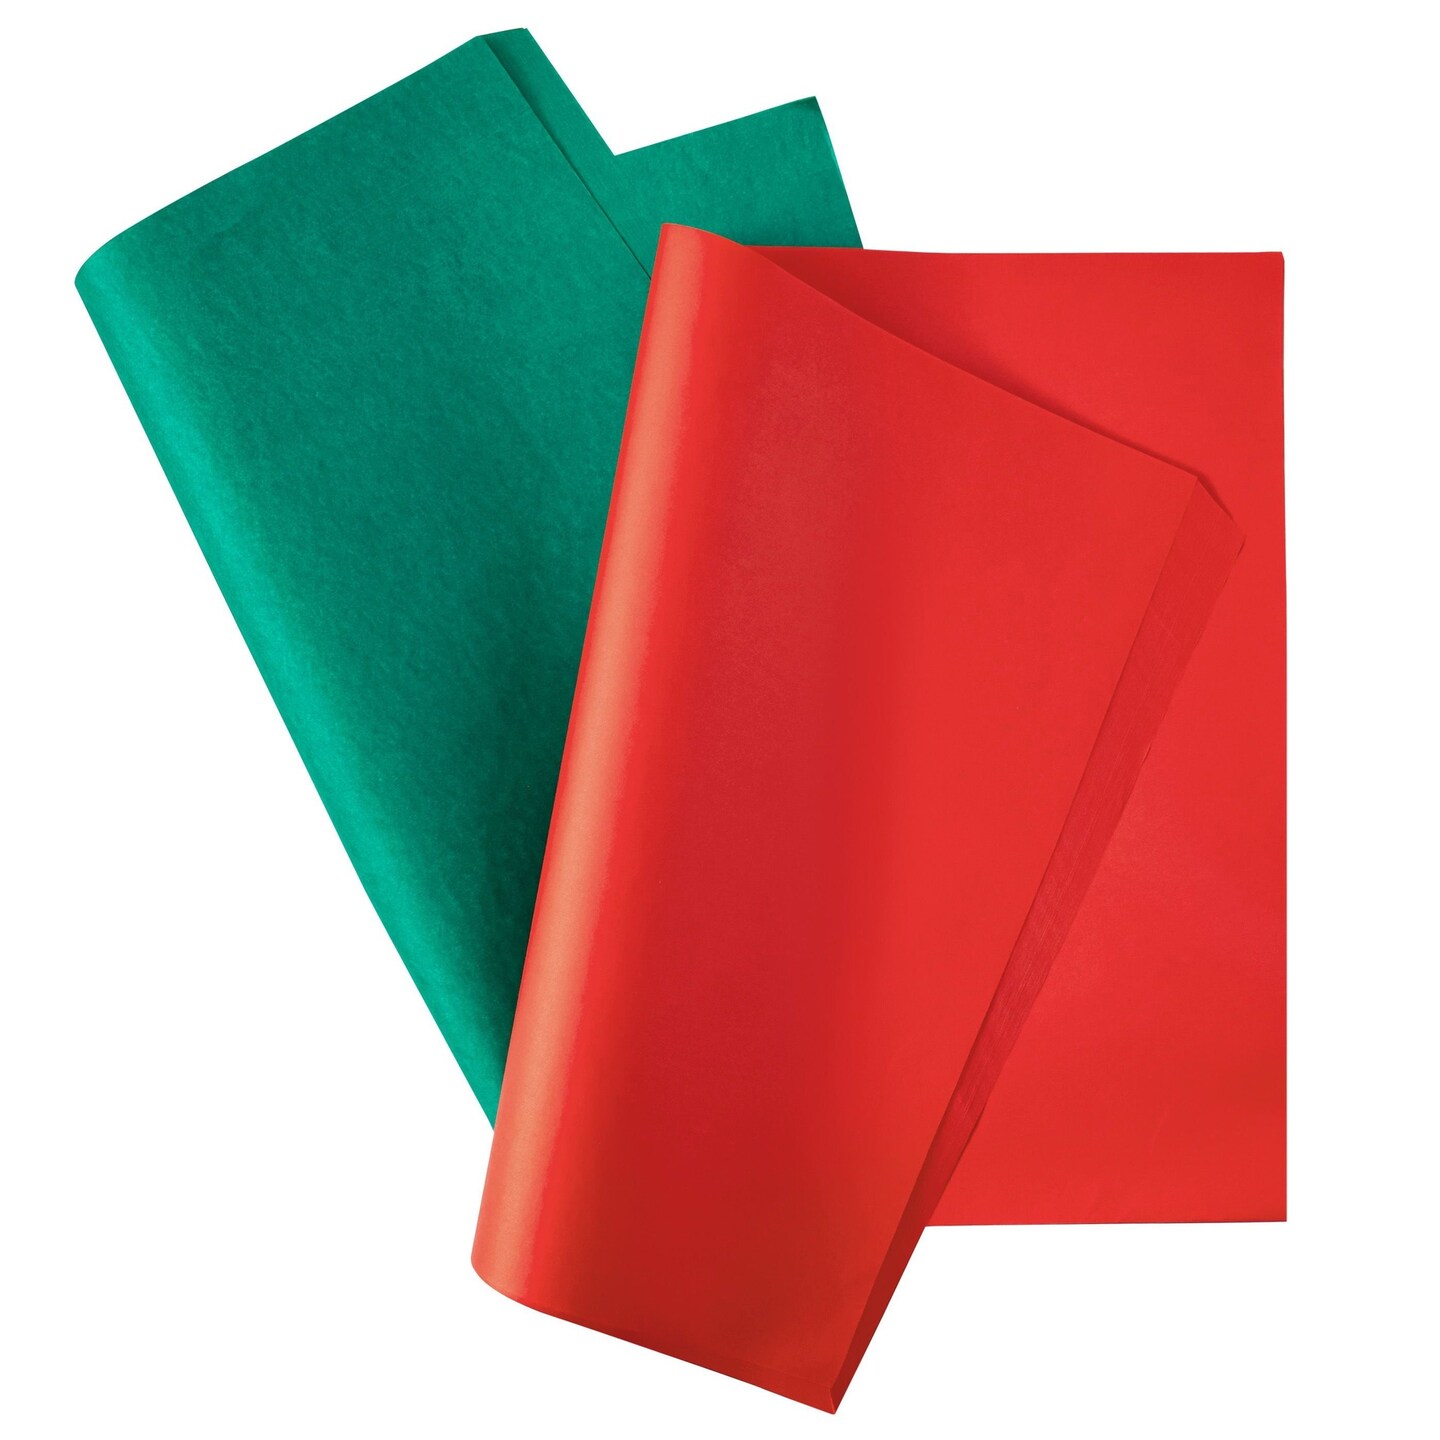 160 Sheets Red and Green Colored Tissue Paper for Gift Wrapping